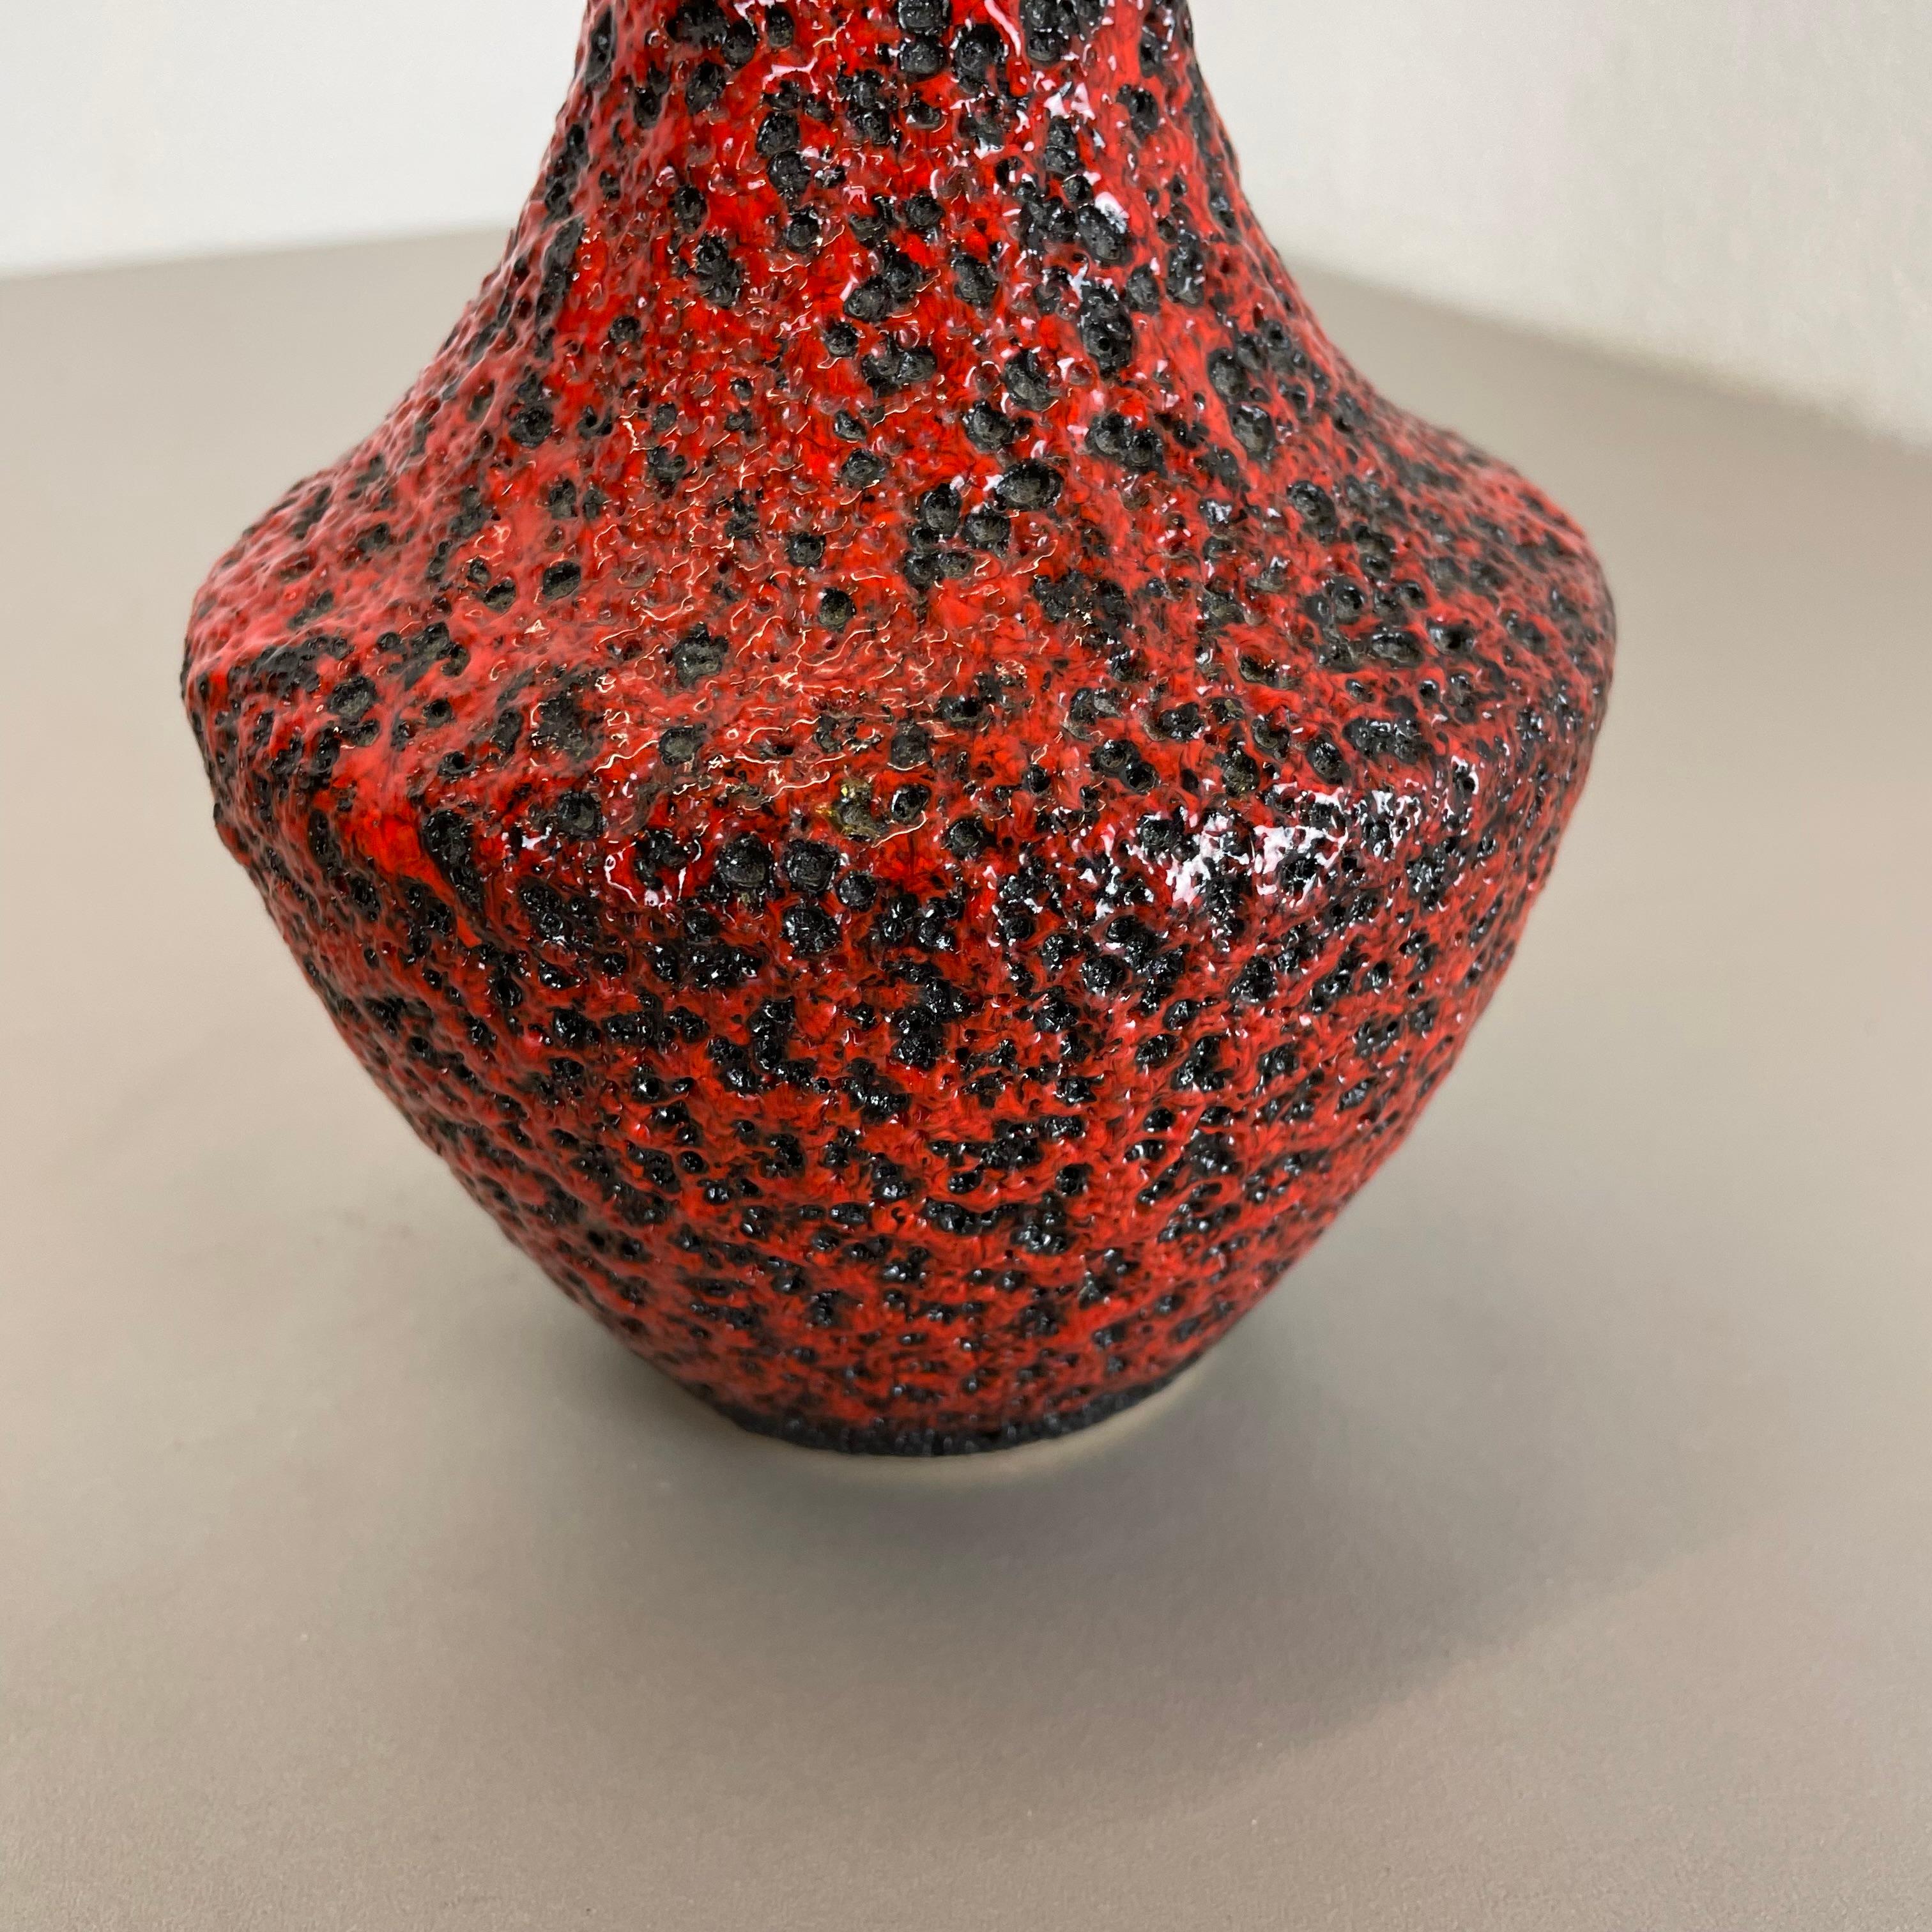 Brutalist Colorful Pottery red-black Vase Made by Silberdistel, W. Germany, 1970 For Sale 3